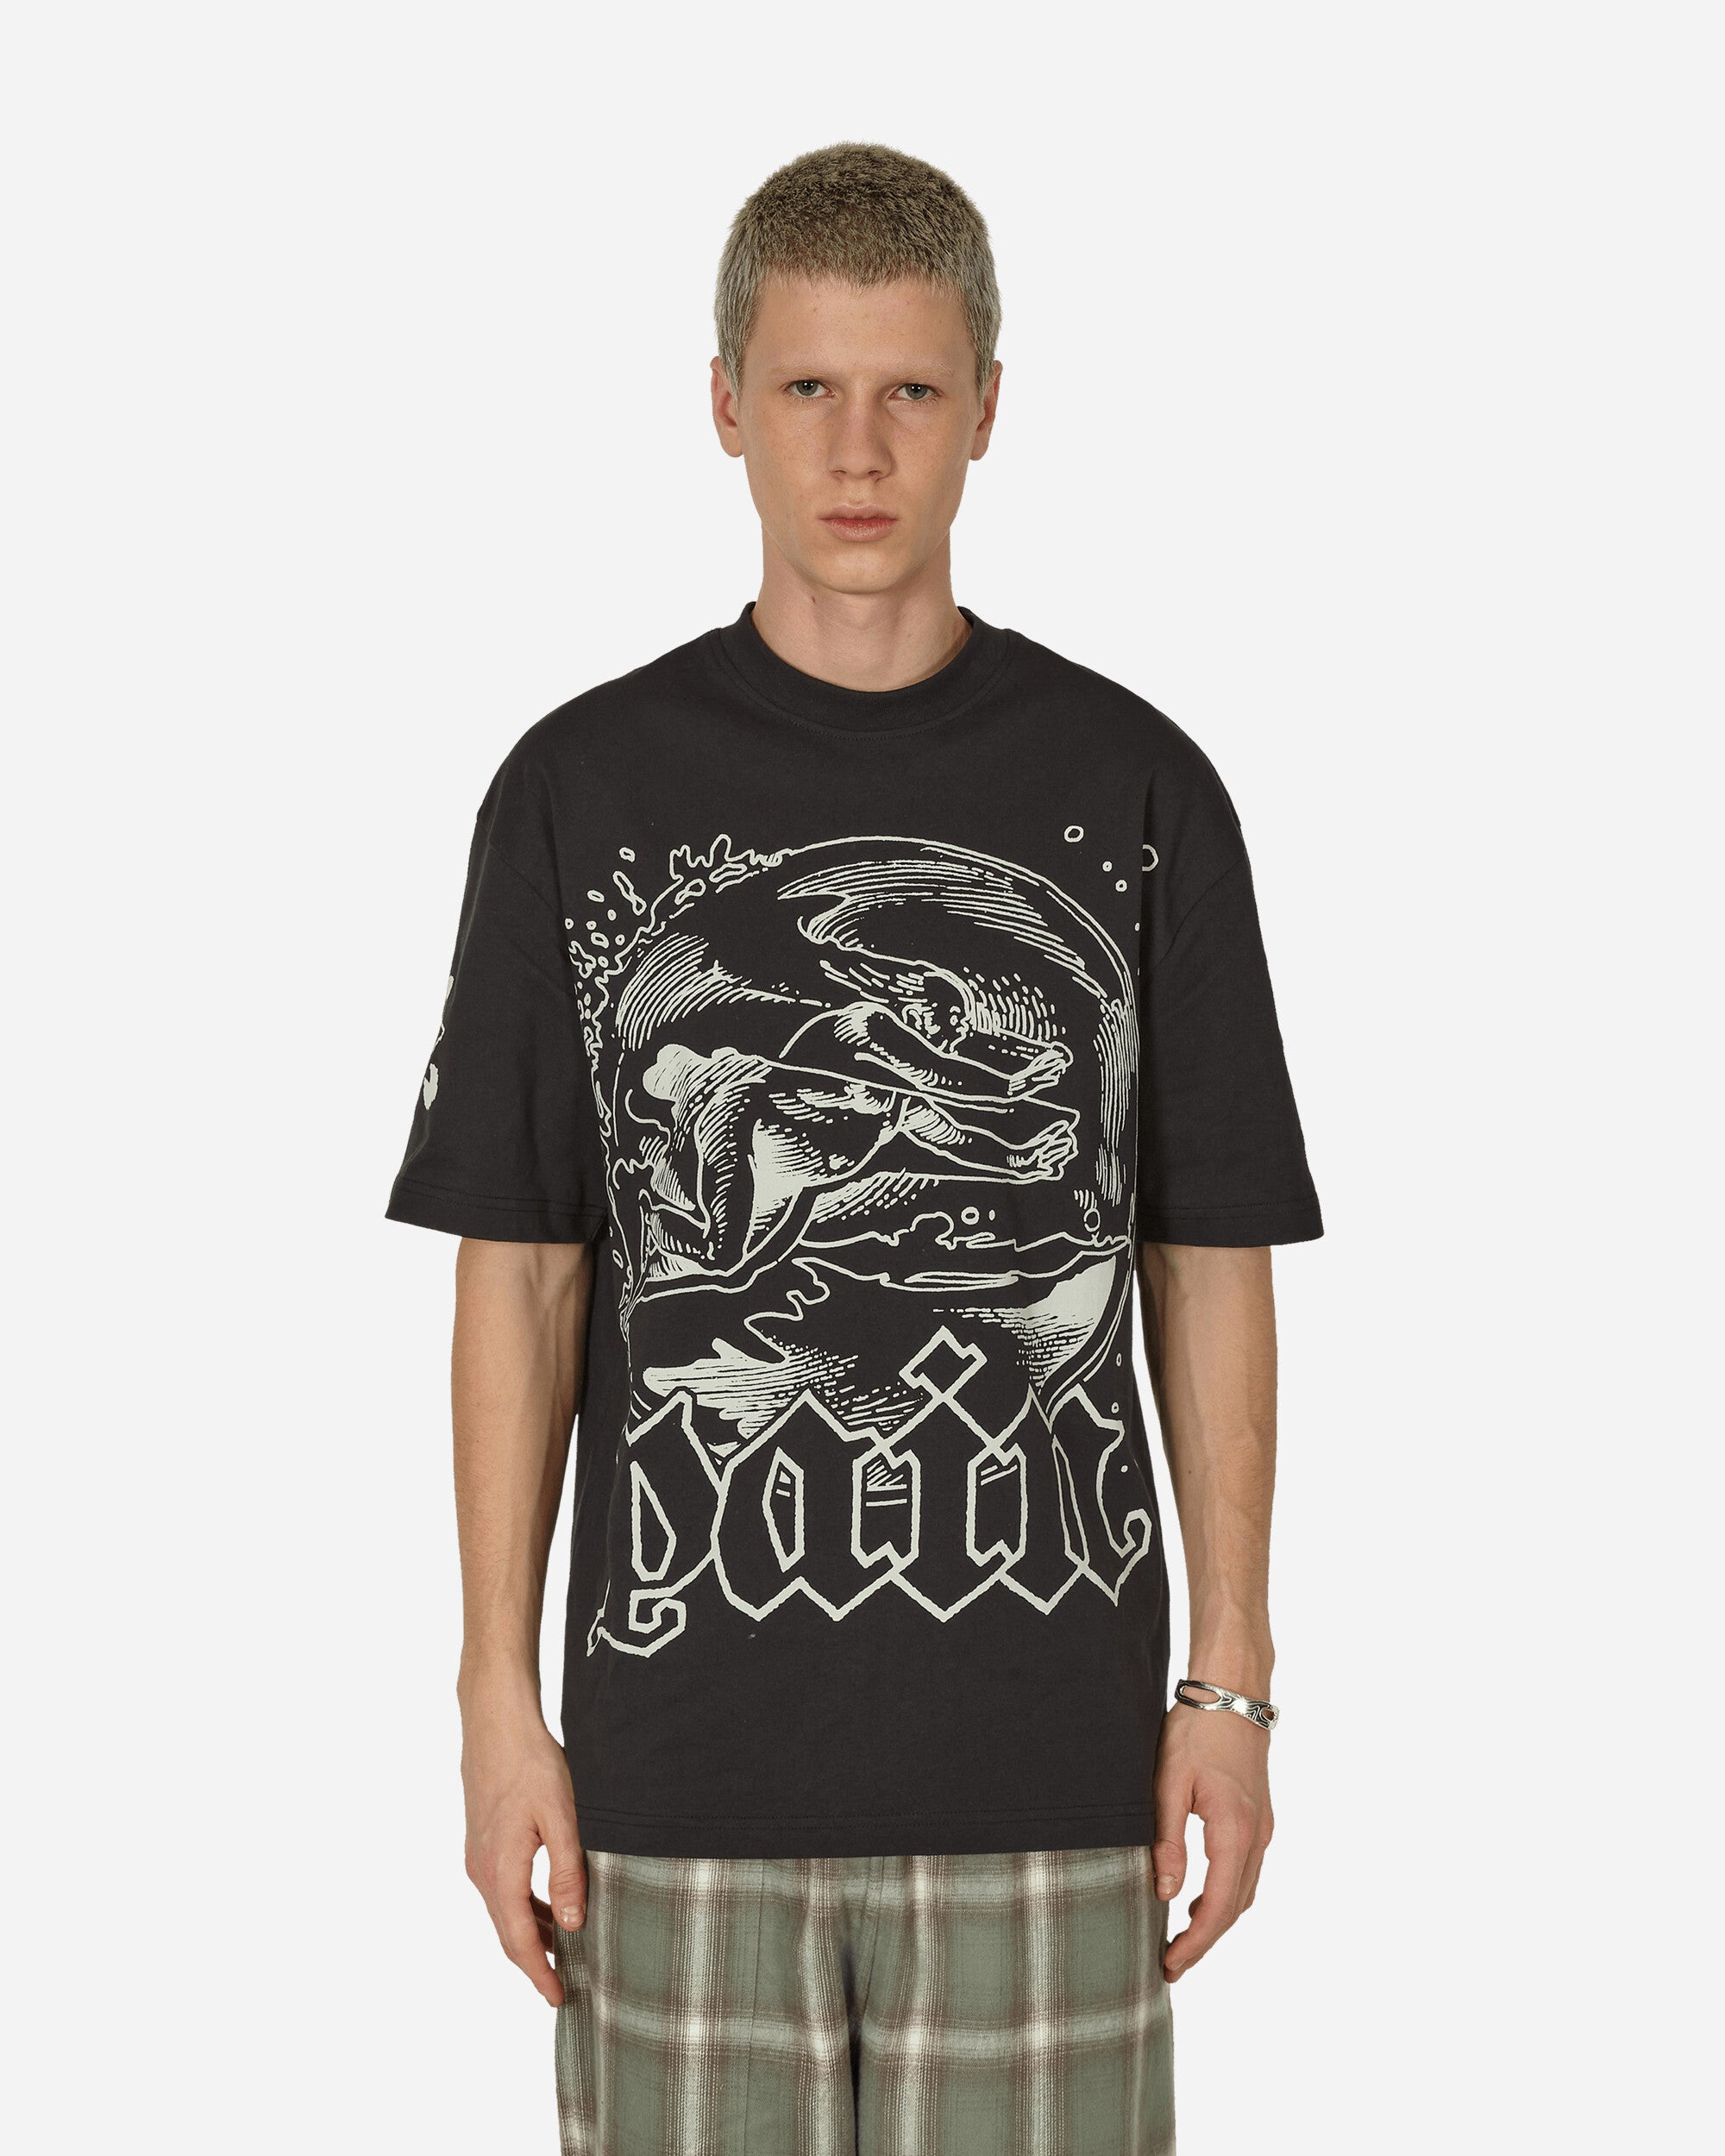 Man In Bubble With Pain T-Shirt Black